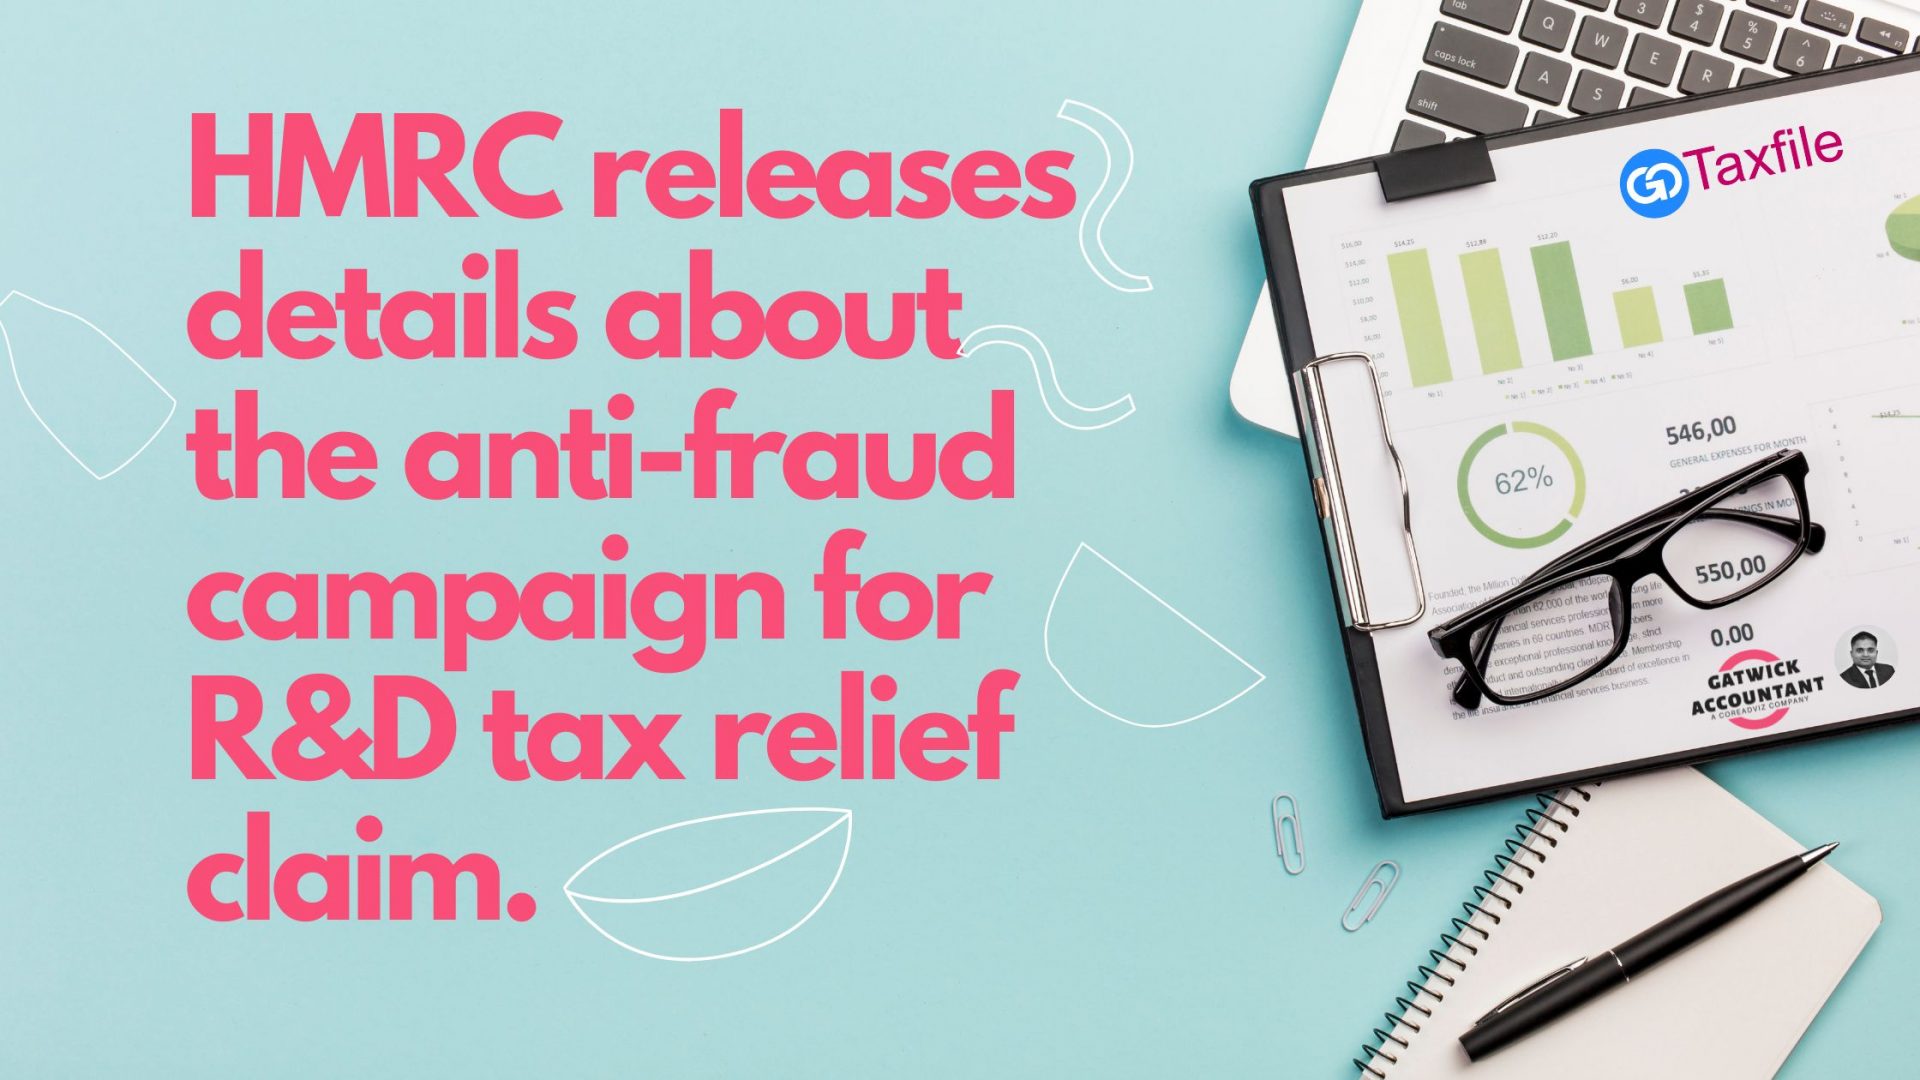 HMRC Releases anti fraud campaign for R&D tax relief claim-Gatwick Accountant